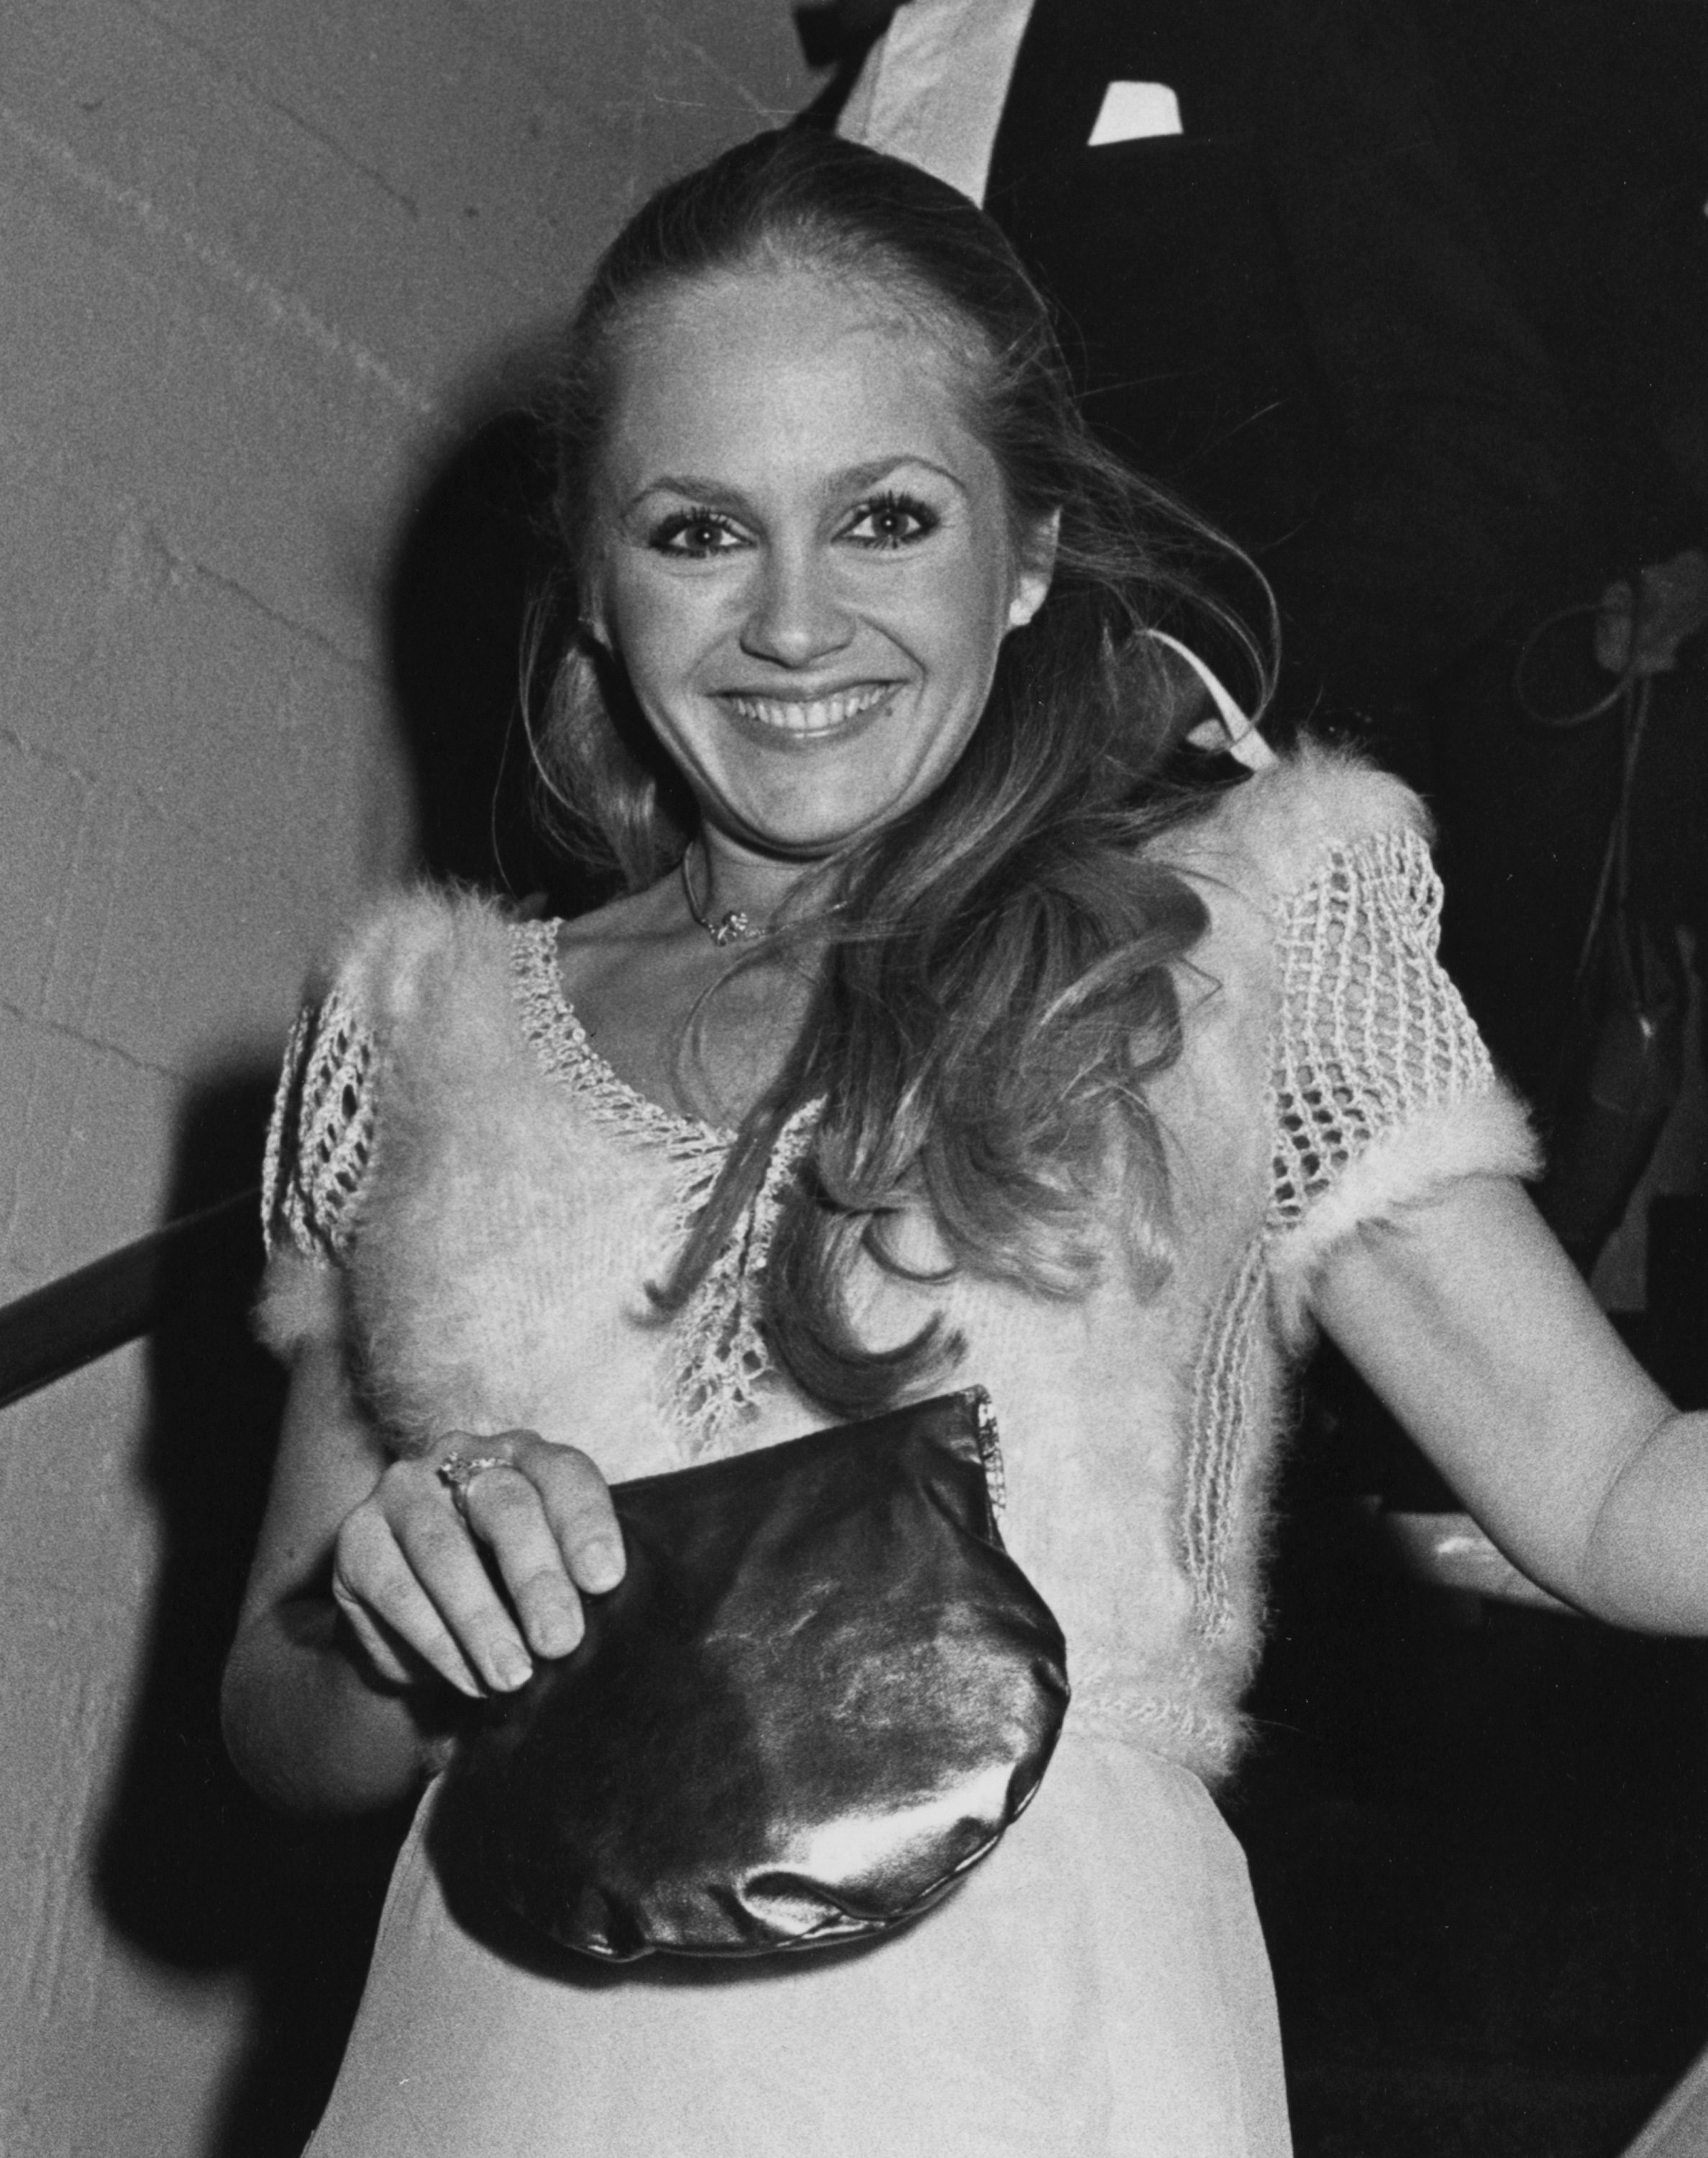 Charlene Tilton at the First Annual Video Awards on April 6, 1983, in Beverly Hills, California. | Source: Ron Galella/Ron Galella Collection/Getty Images